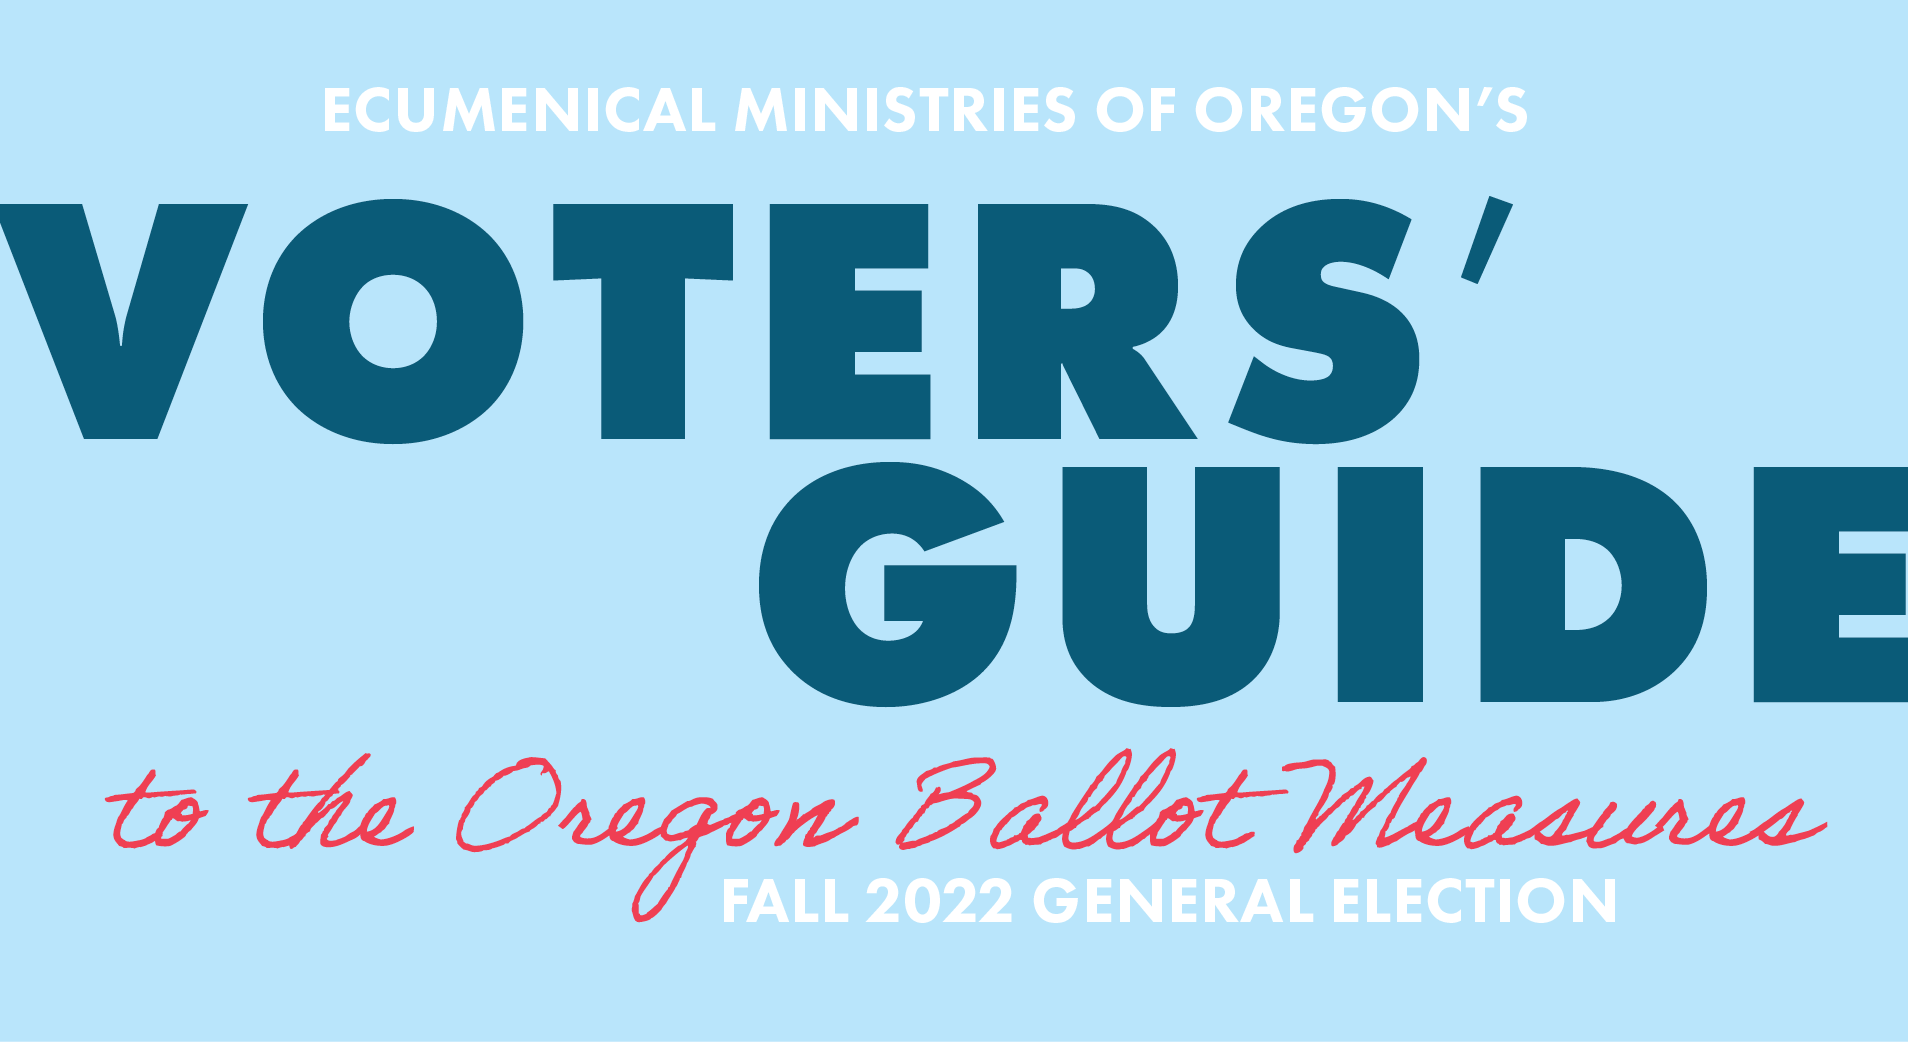 Fall 2022 VOICE / Voters’ Guide to Oregon Ballot Measures